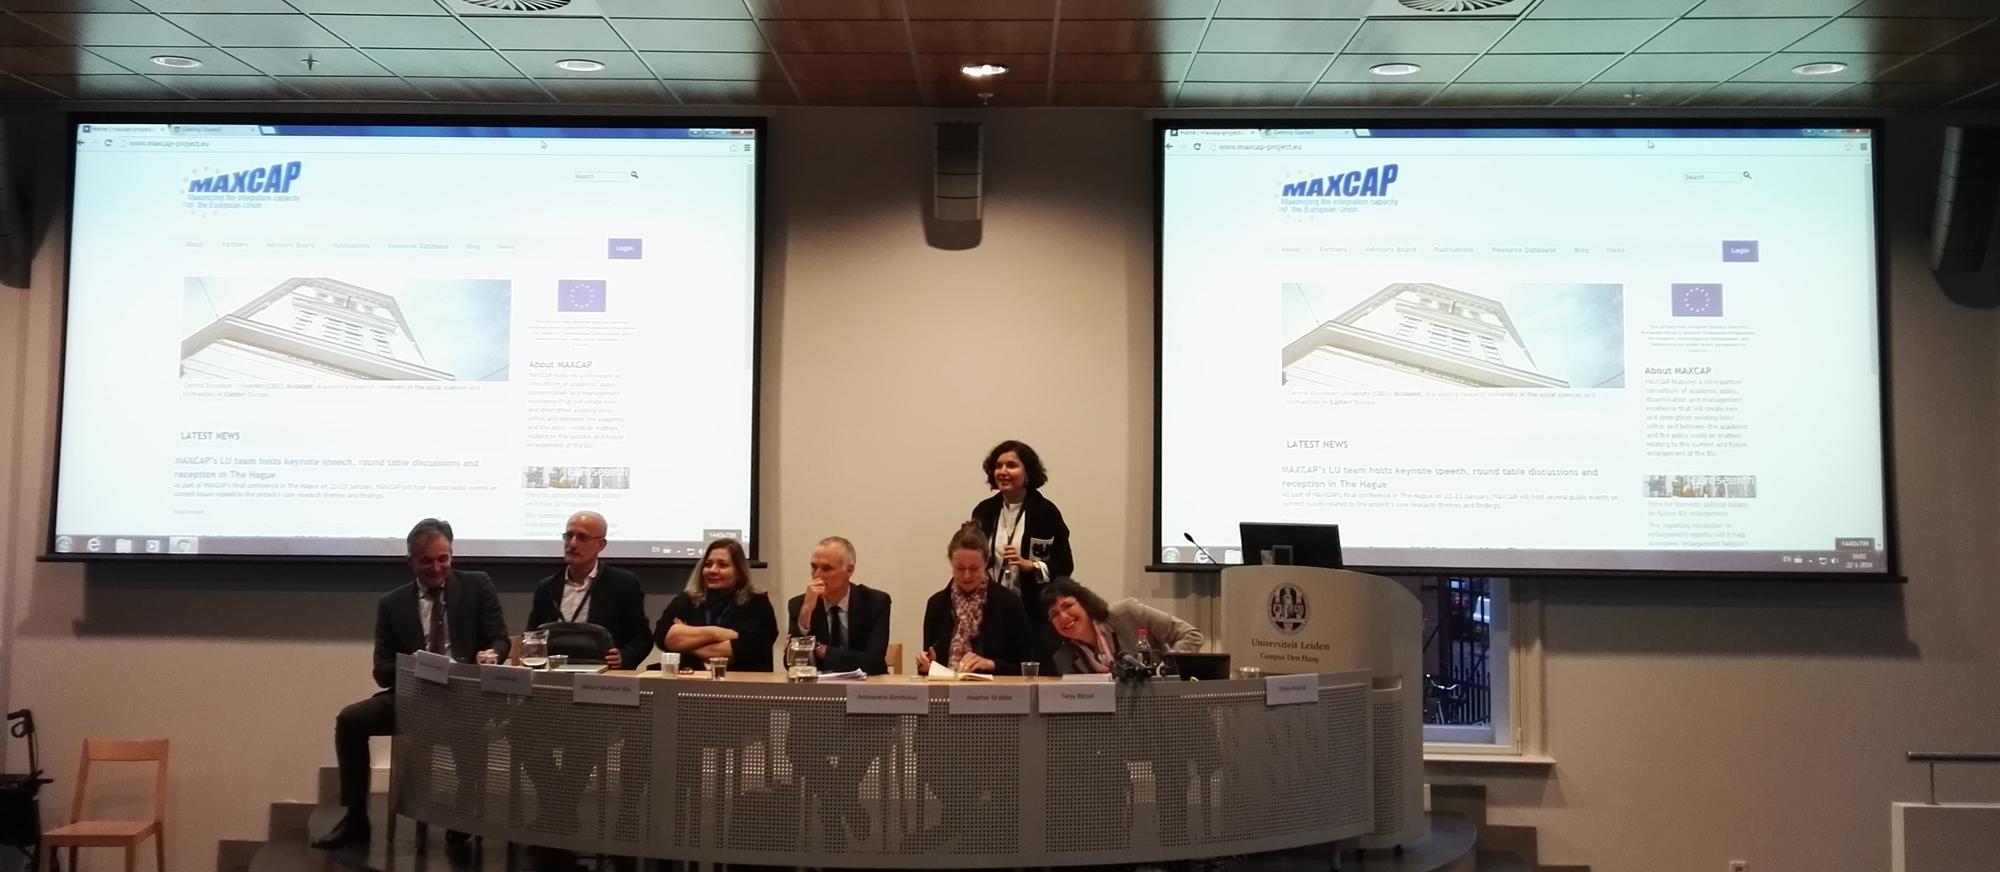 MAXCAP final conference in The Hague